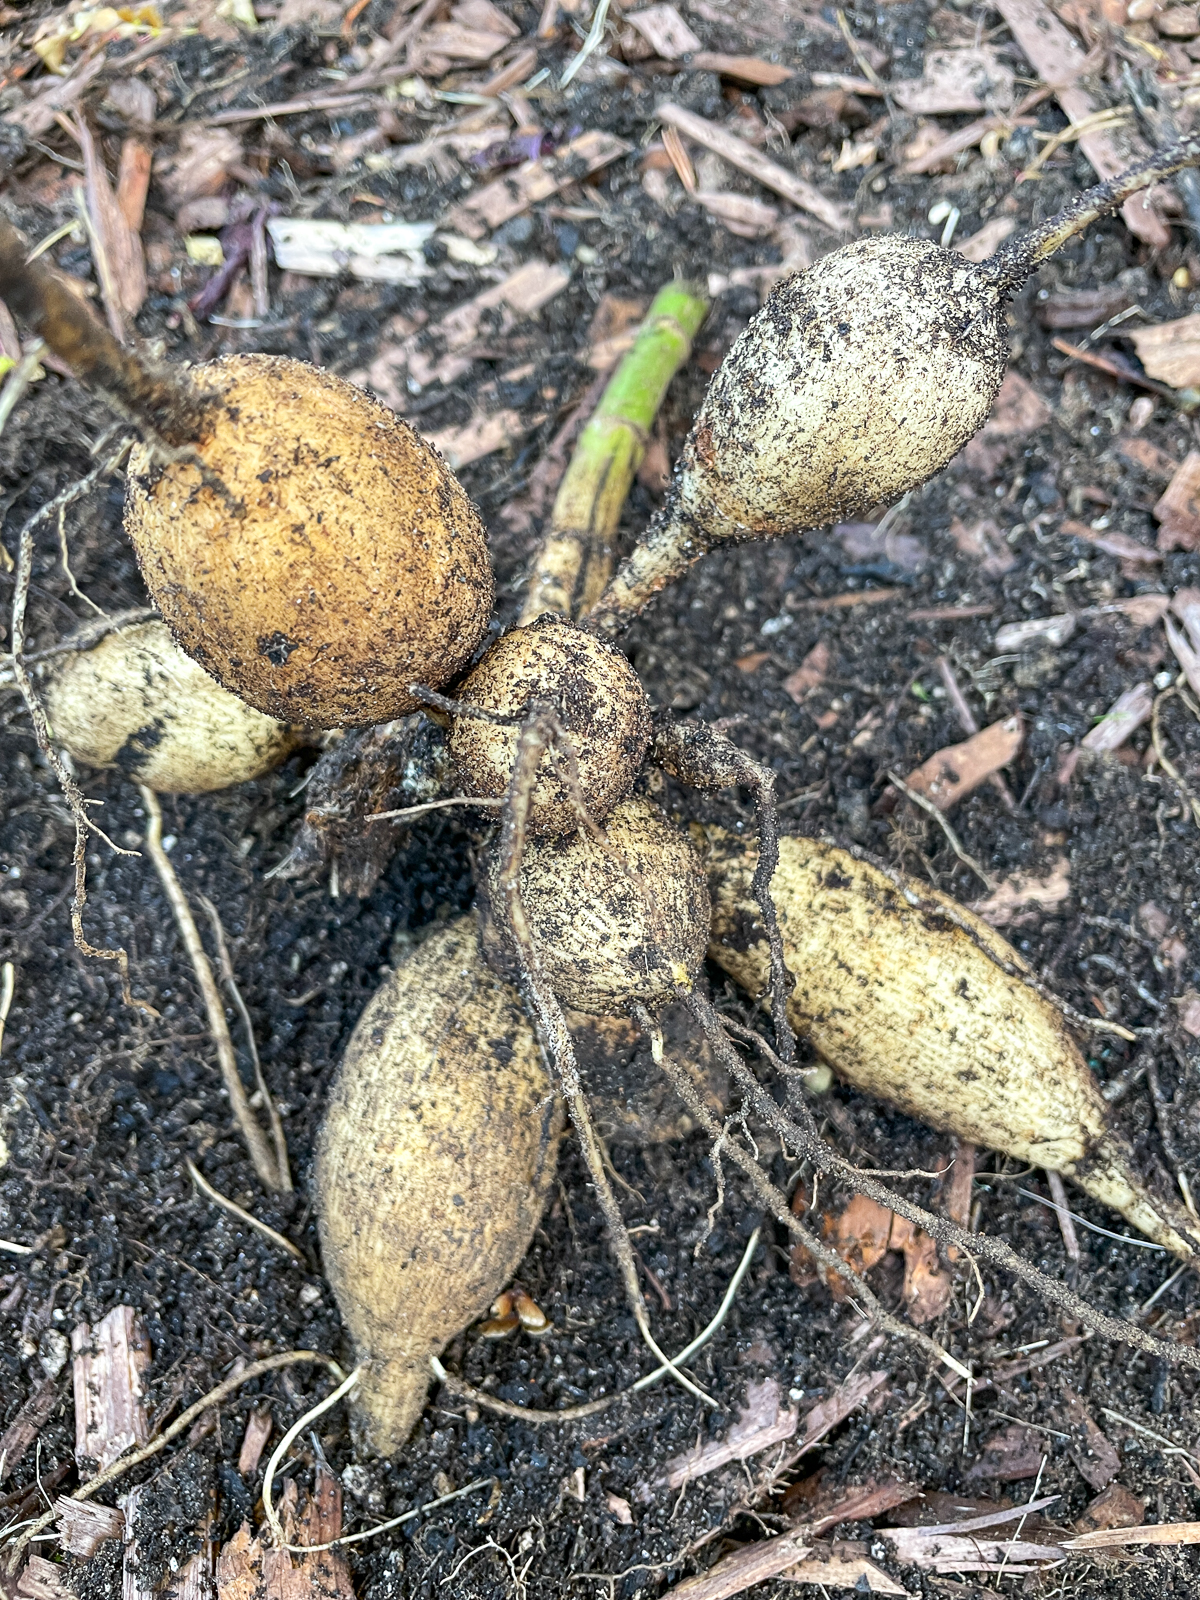 cleaned off dahlia tuber clump